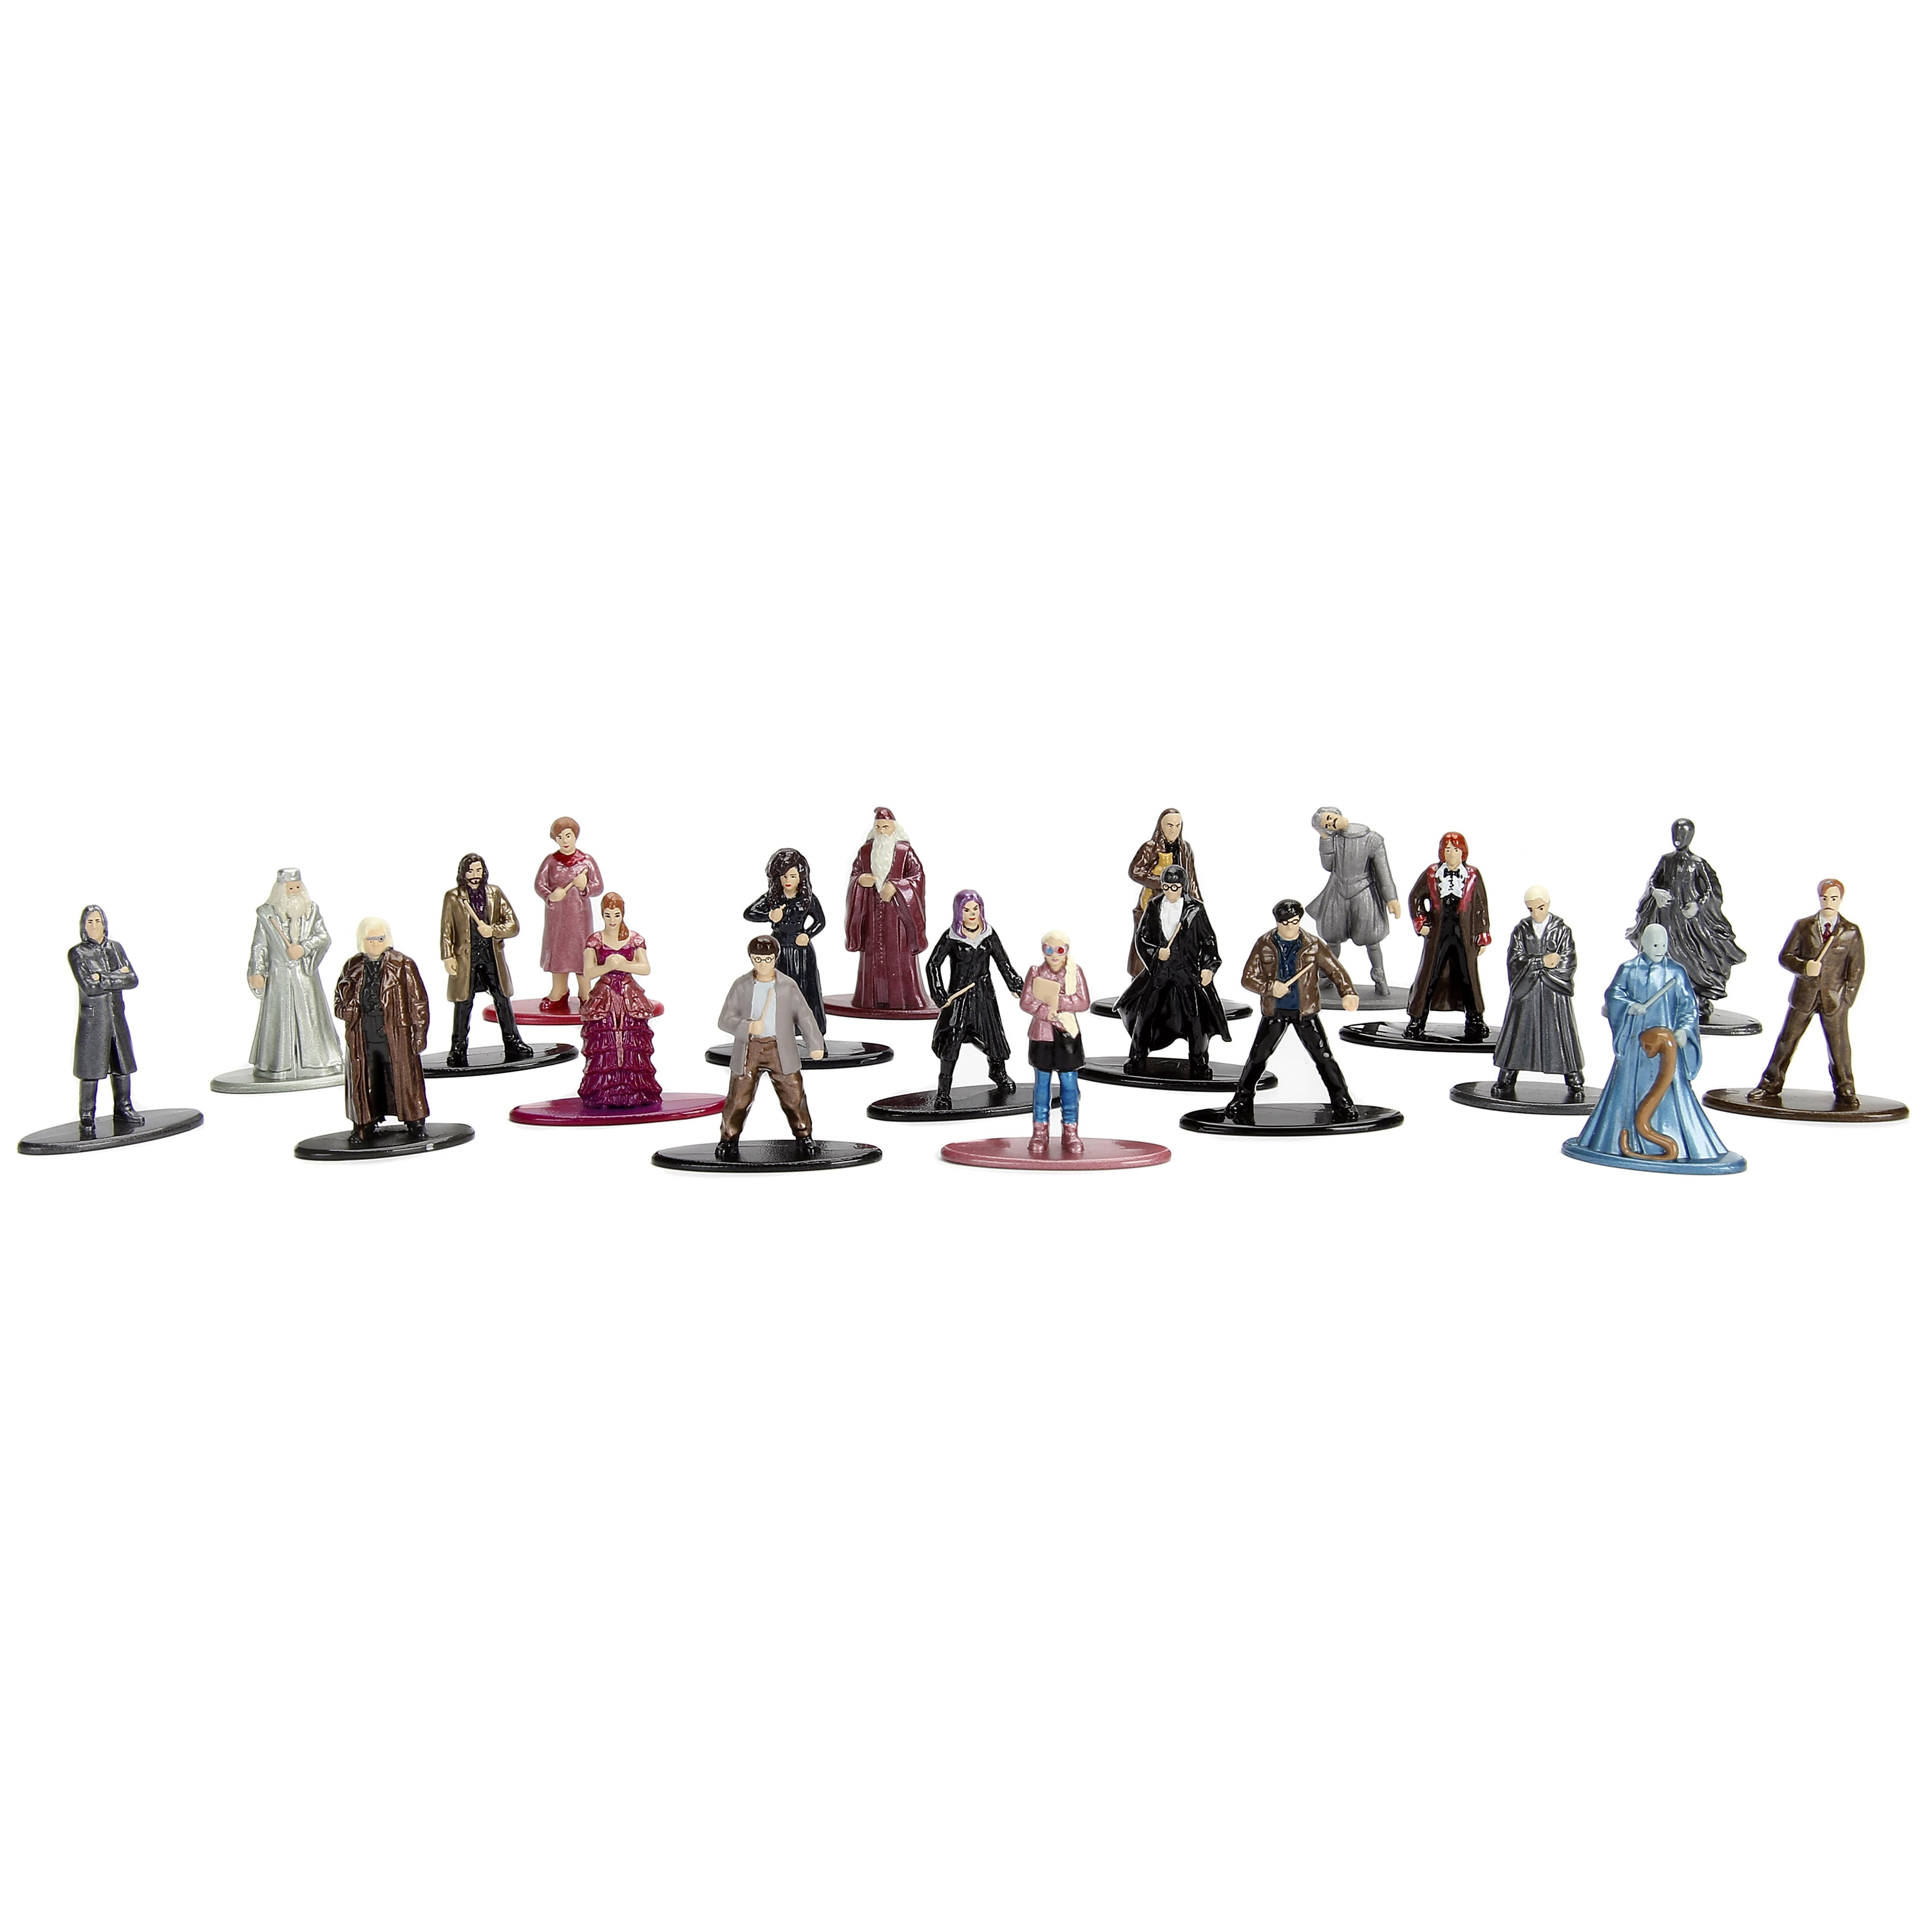 Jada Toys Harry Potter 1.65 Die-cast Metal Collectible Figures 20-Pack  Wave 4, Toys for Kids and Adults, Silver